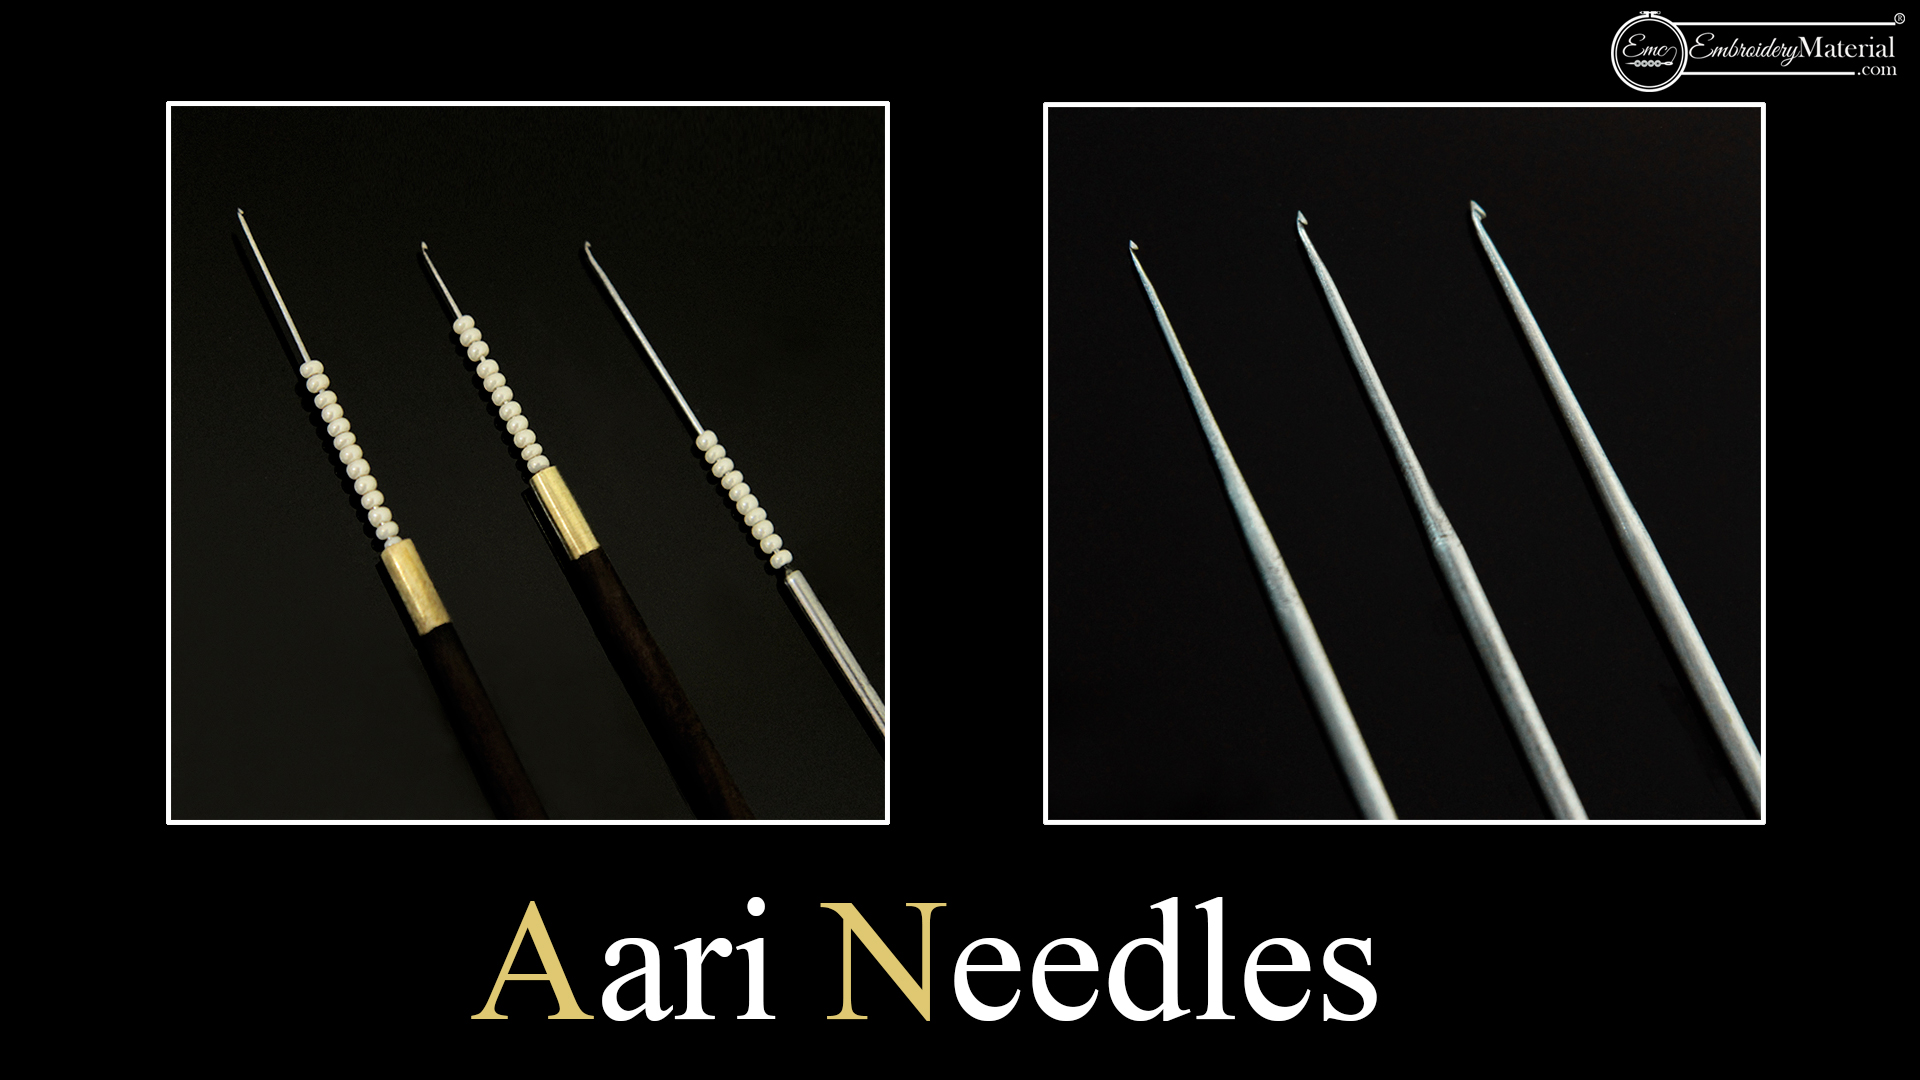 Types of Aari Needles used for Hand Embroidery